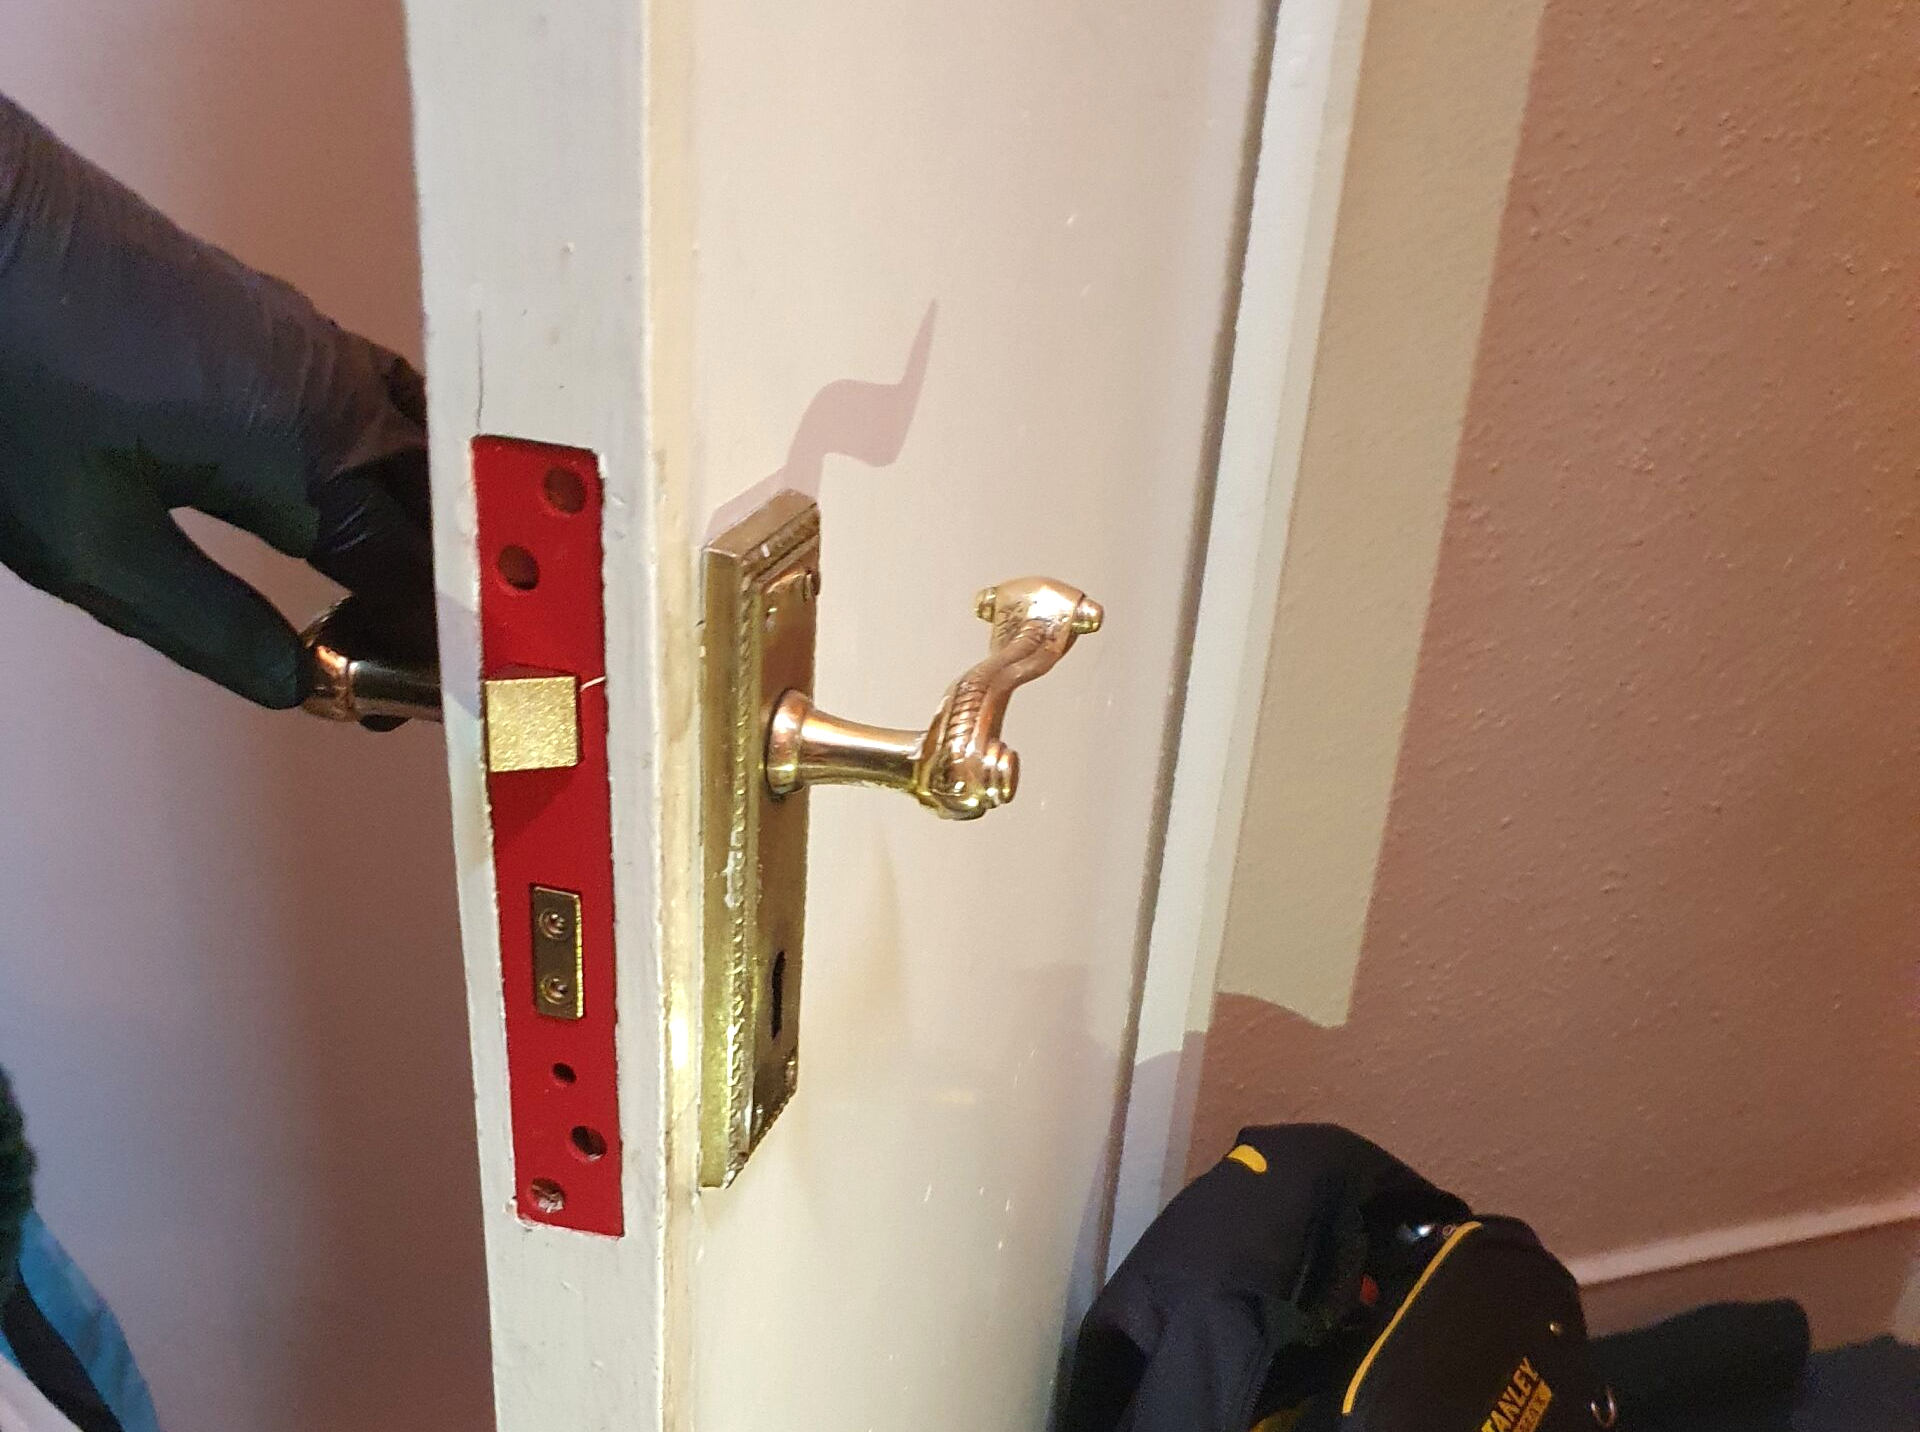 after burglary locksmith services in and around Morden